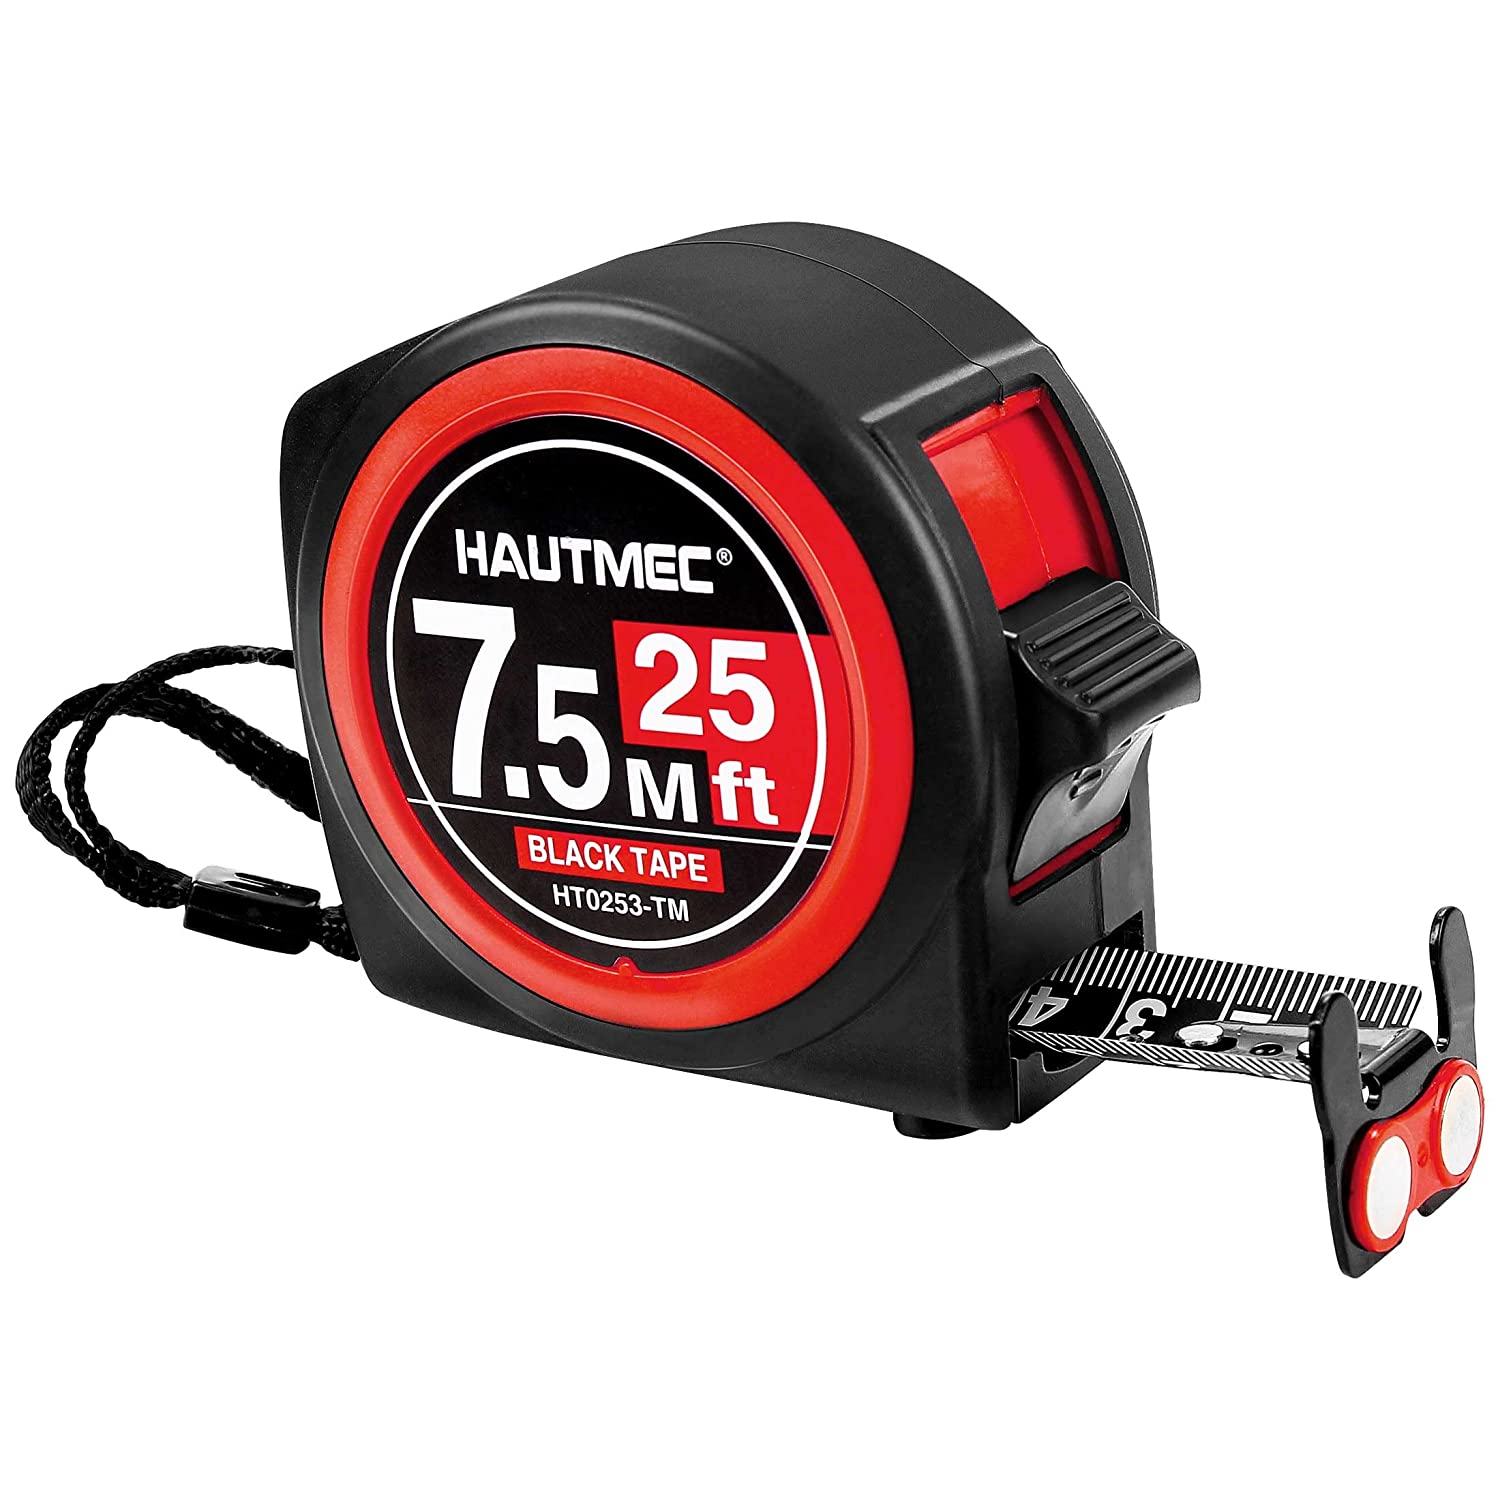 HAUTMEC Measuring Tape 25Ft-Double Side Metric and Inches Black